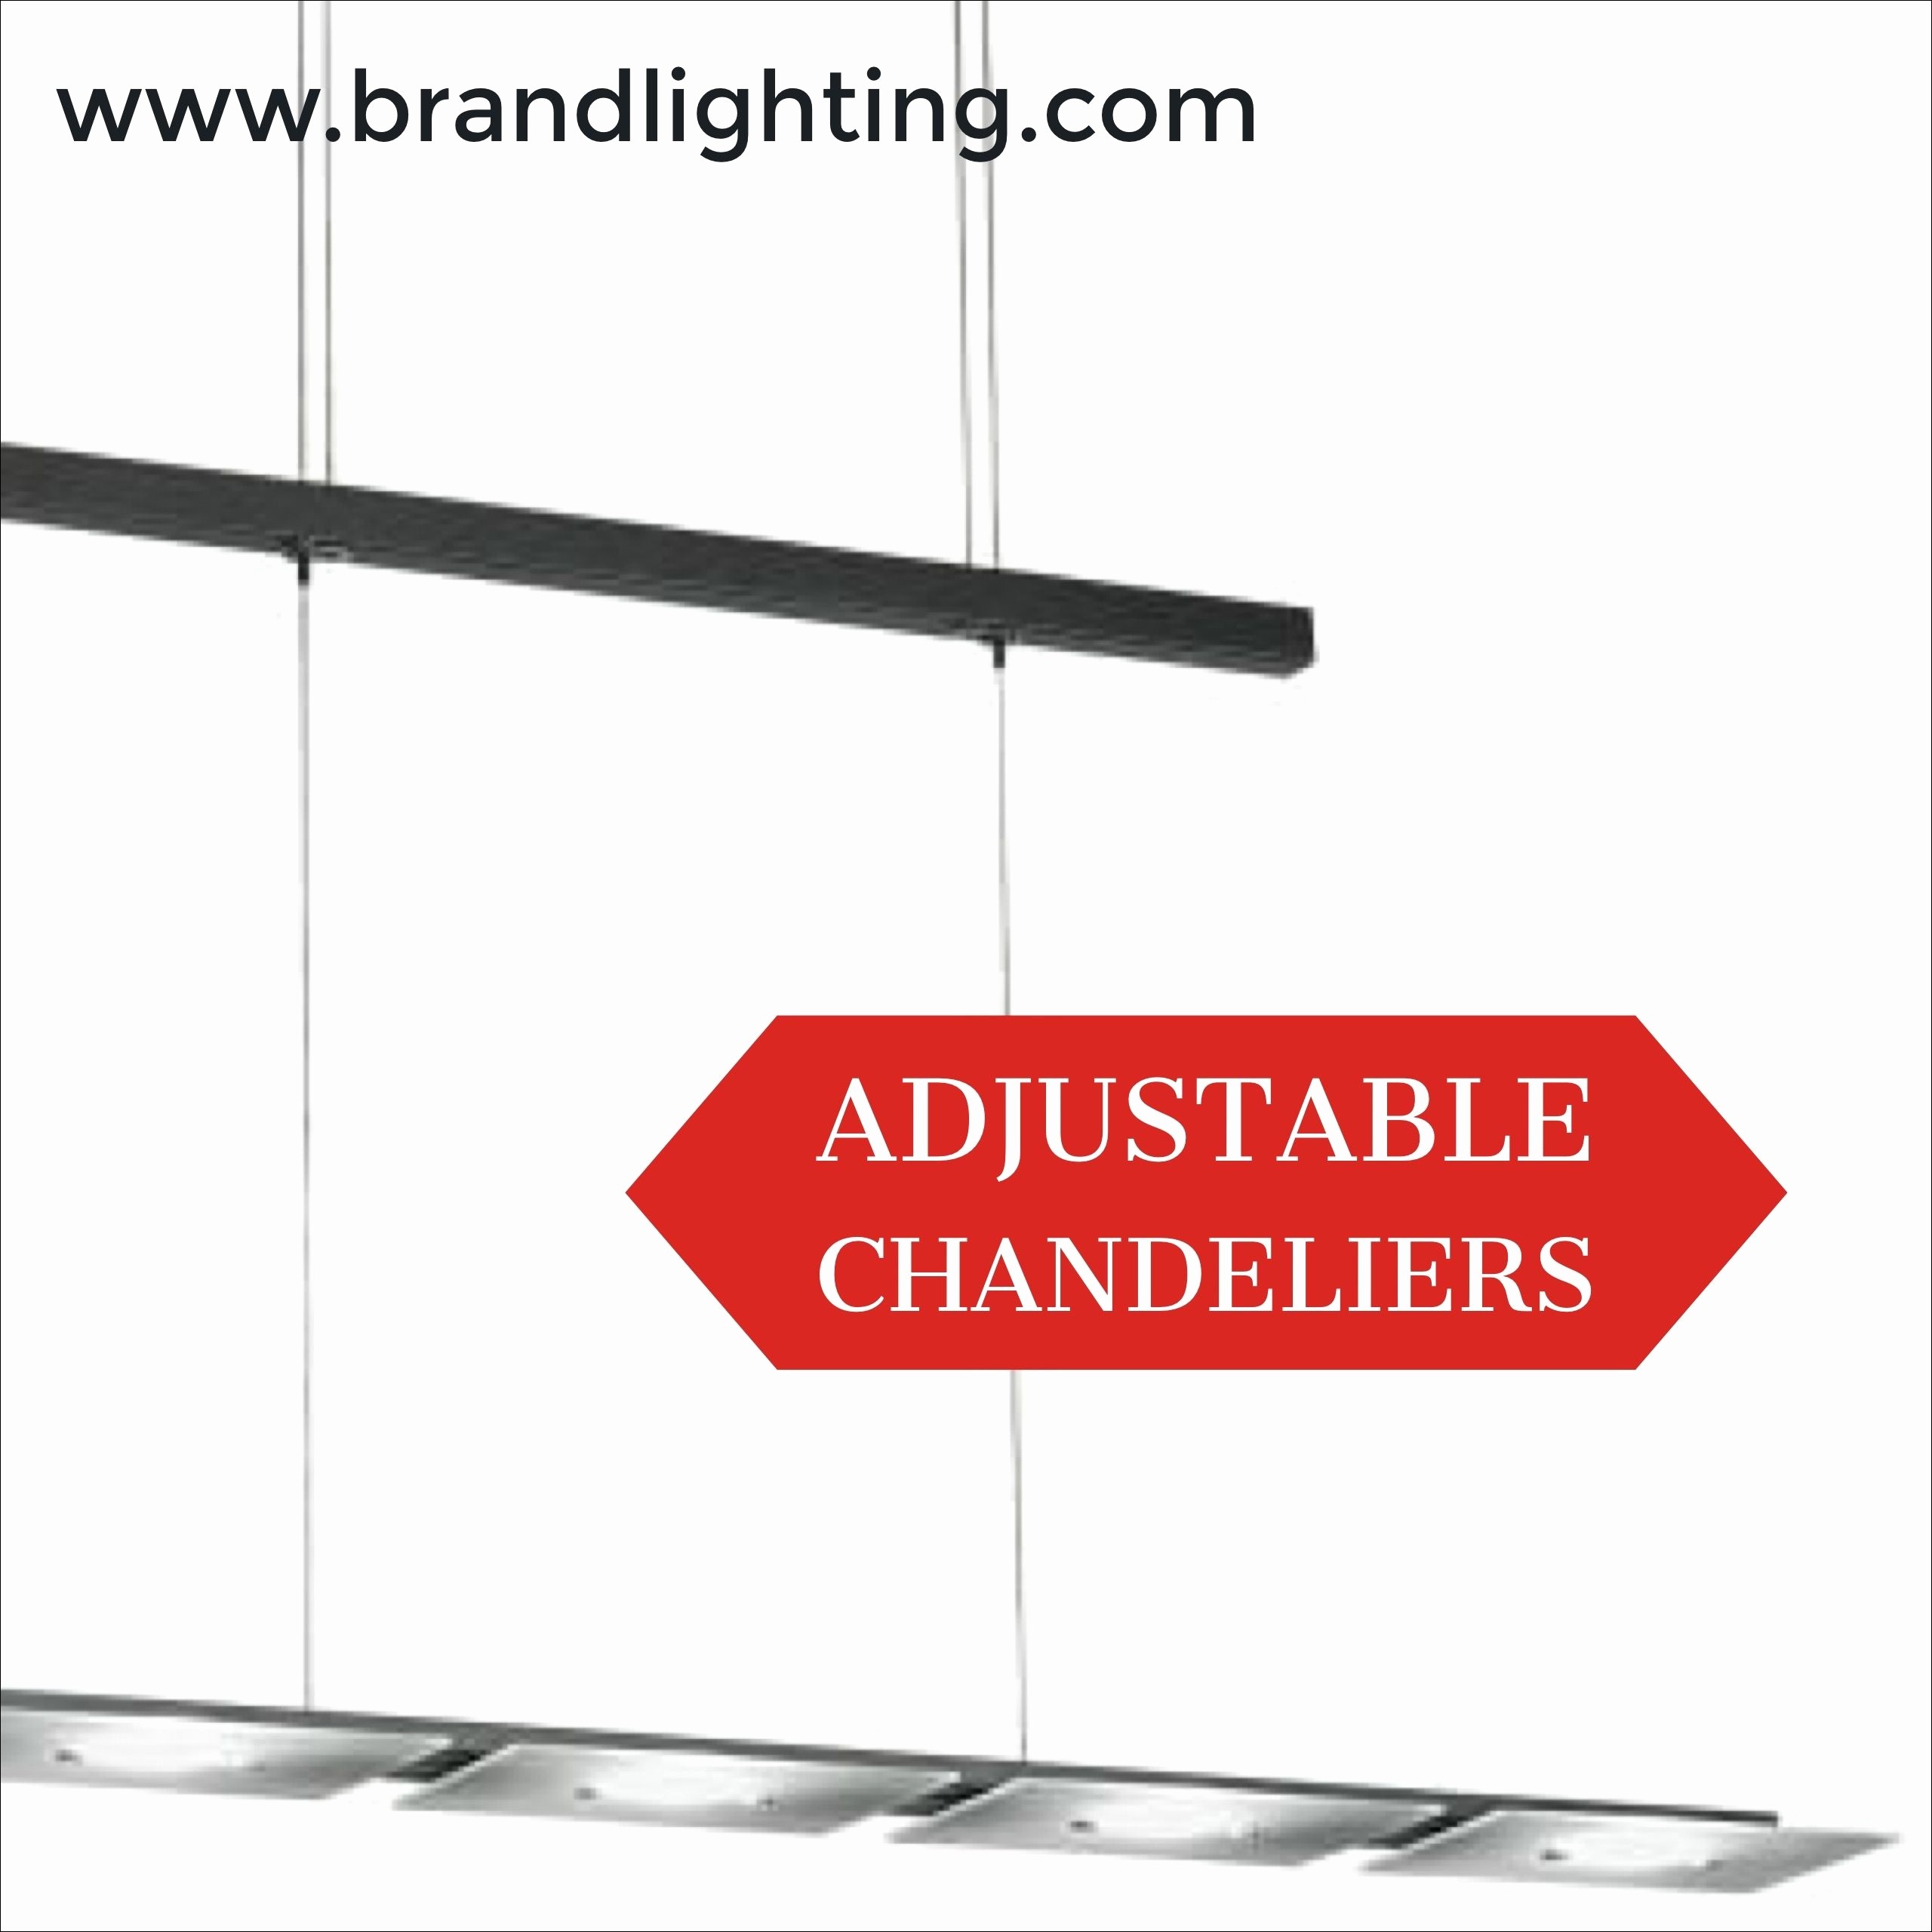 Chandelier Wiring Diagram Chandelier Wiring Diagram Fresh Adjustable Chandeliers these Chandeliers May Be Easily Adjusted